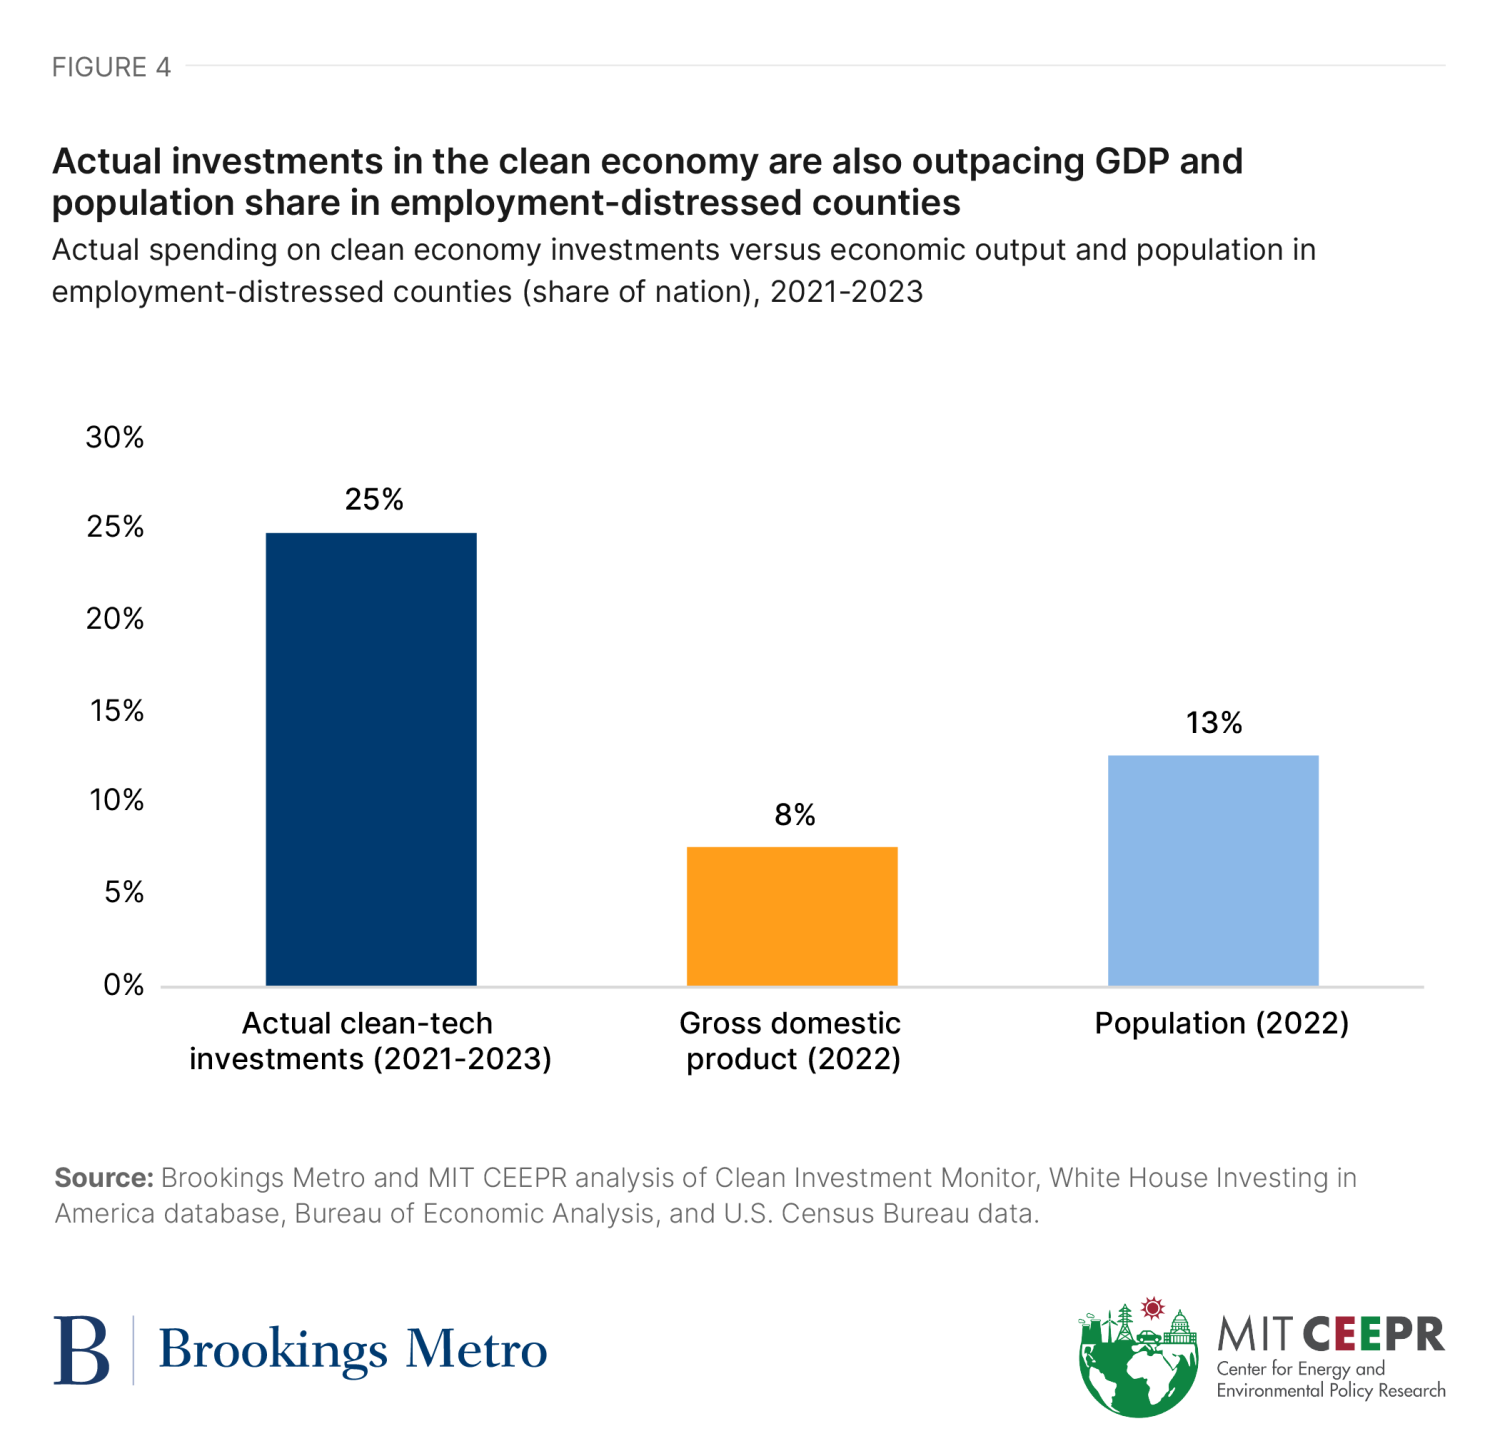 Figure 4: Actual investments in the clean economy are also outpacing GDP and population share in employment-distressed counties